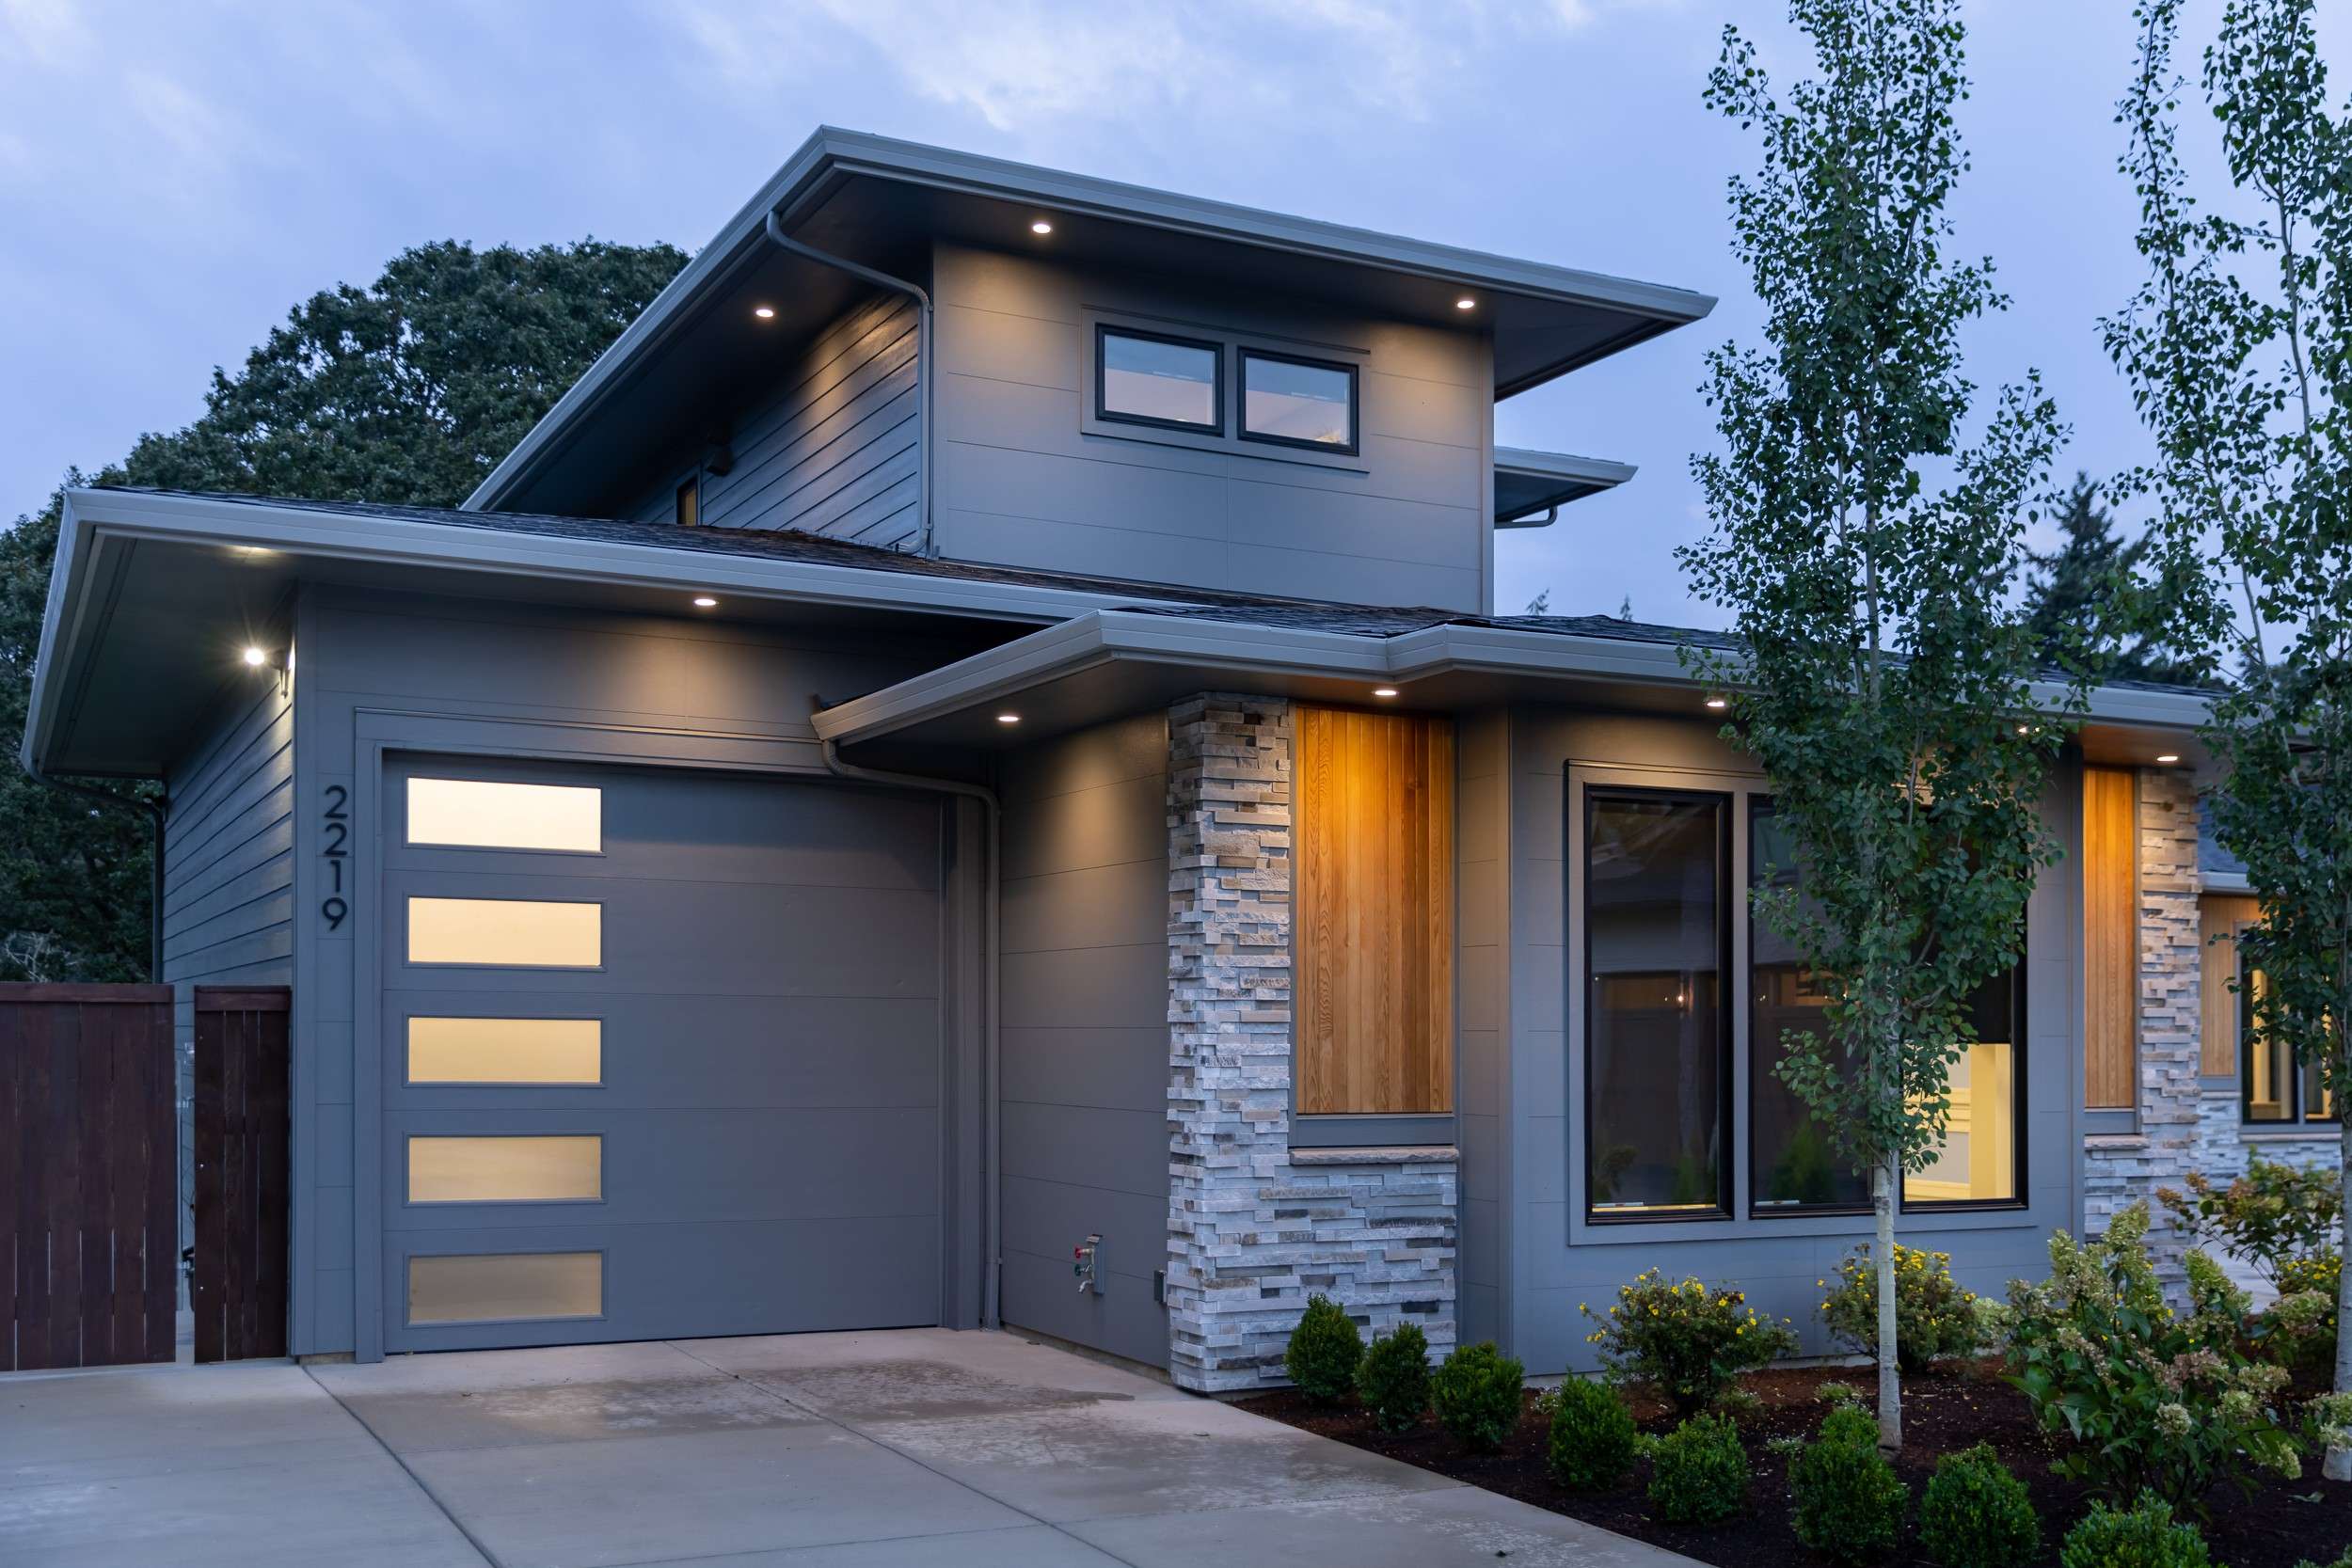 Stratoside displays an example of a modern home with JamesHardie Panels and Stone Veneer.